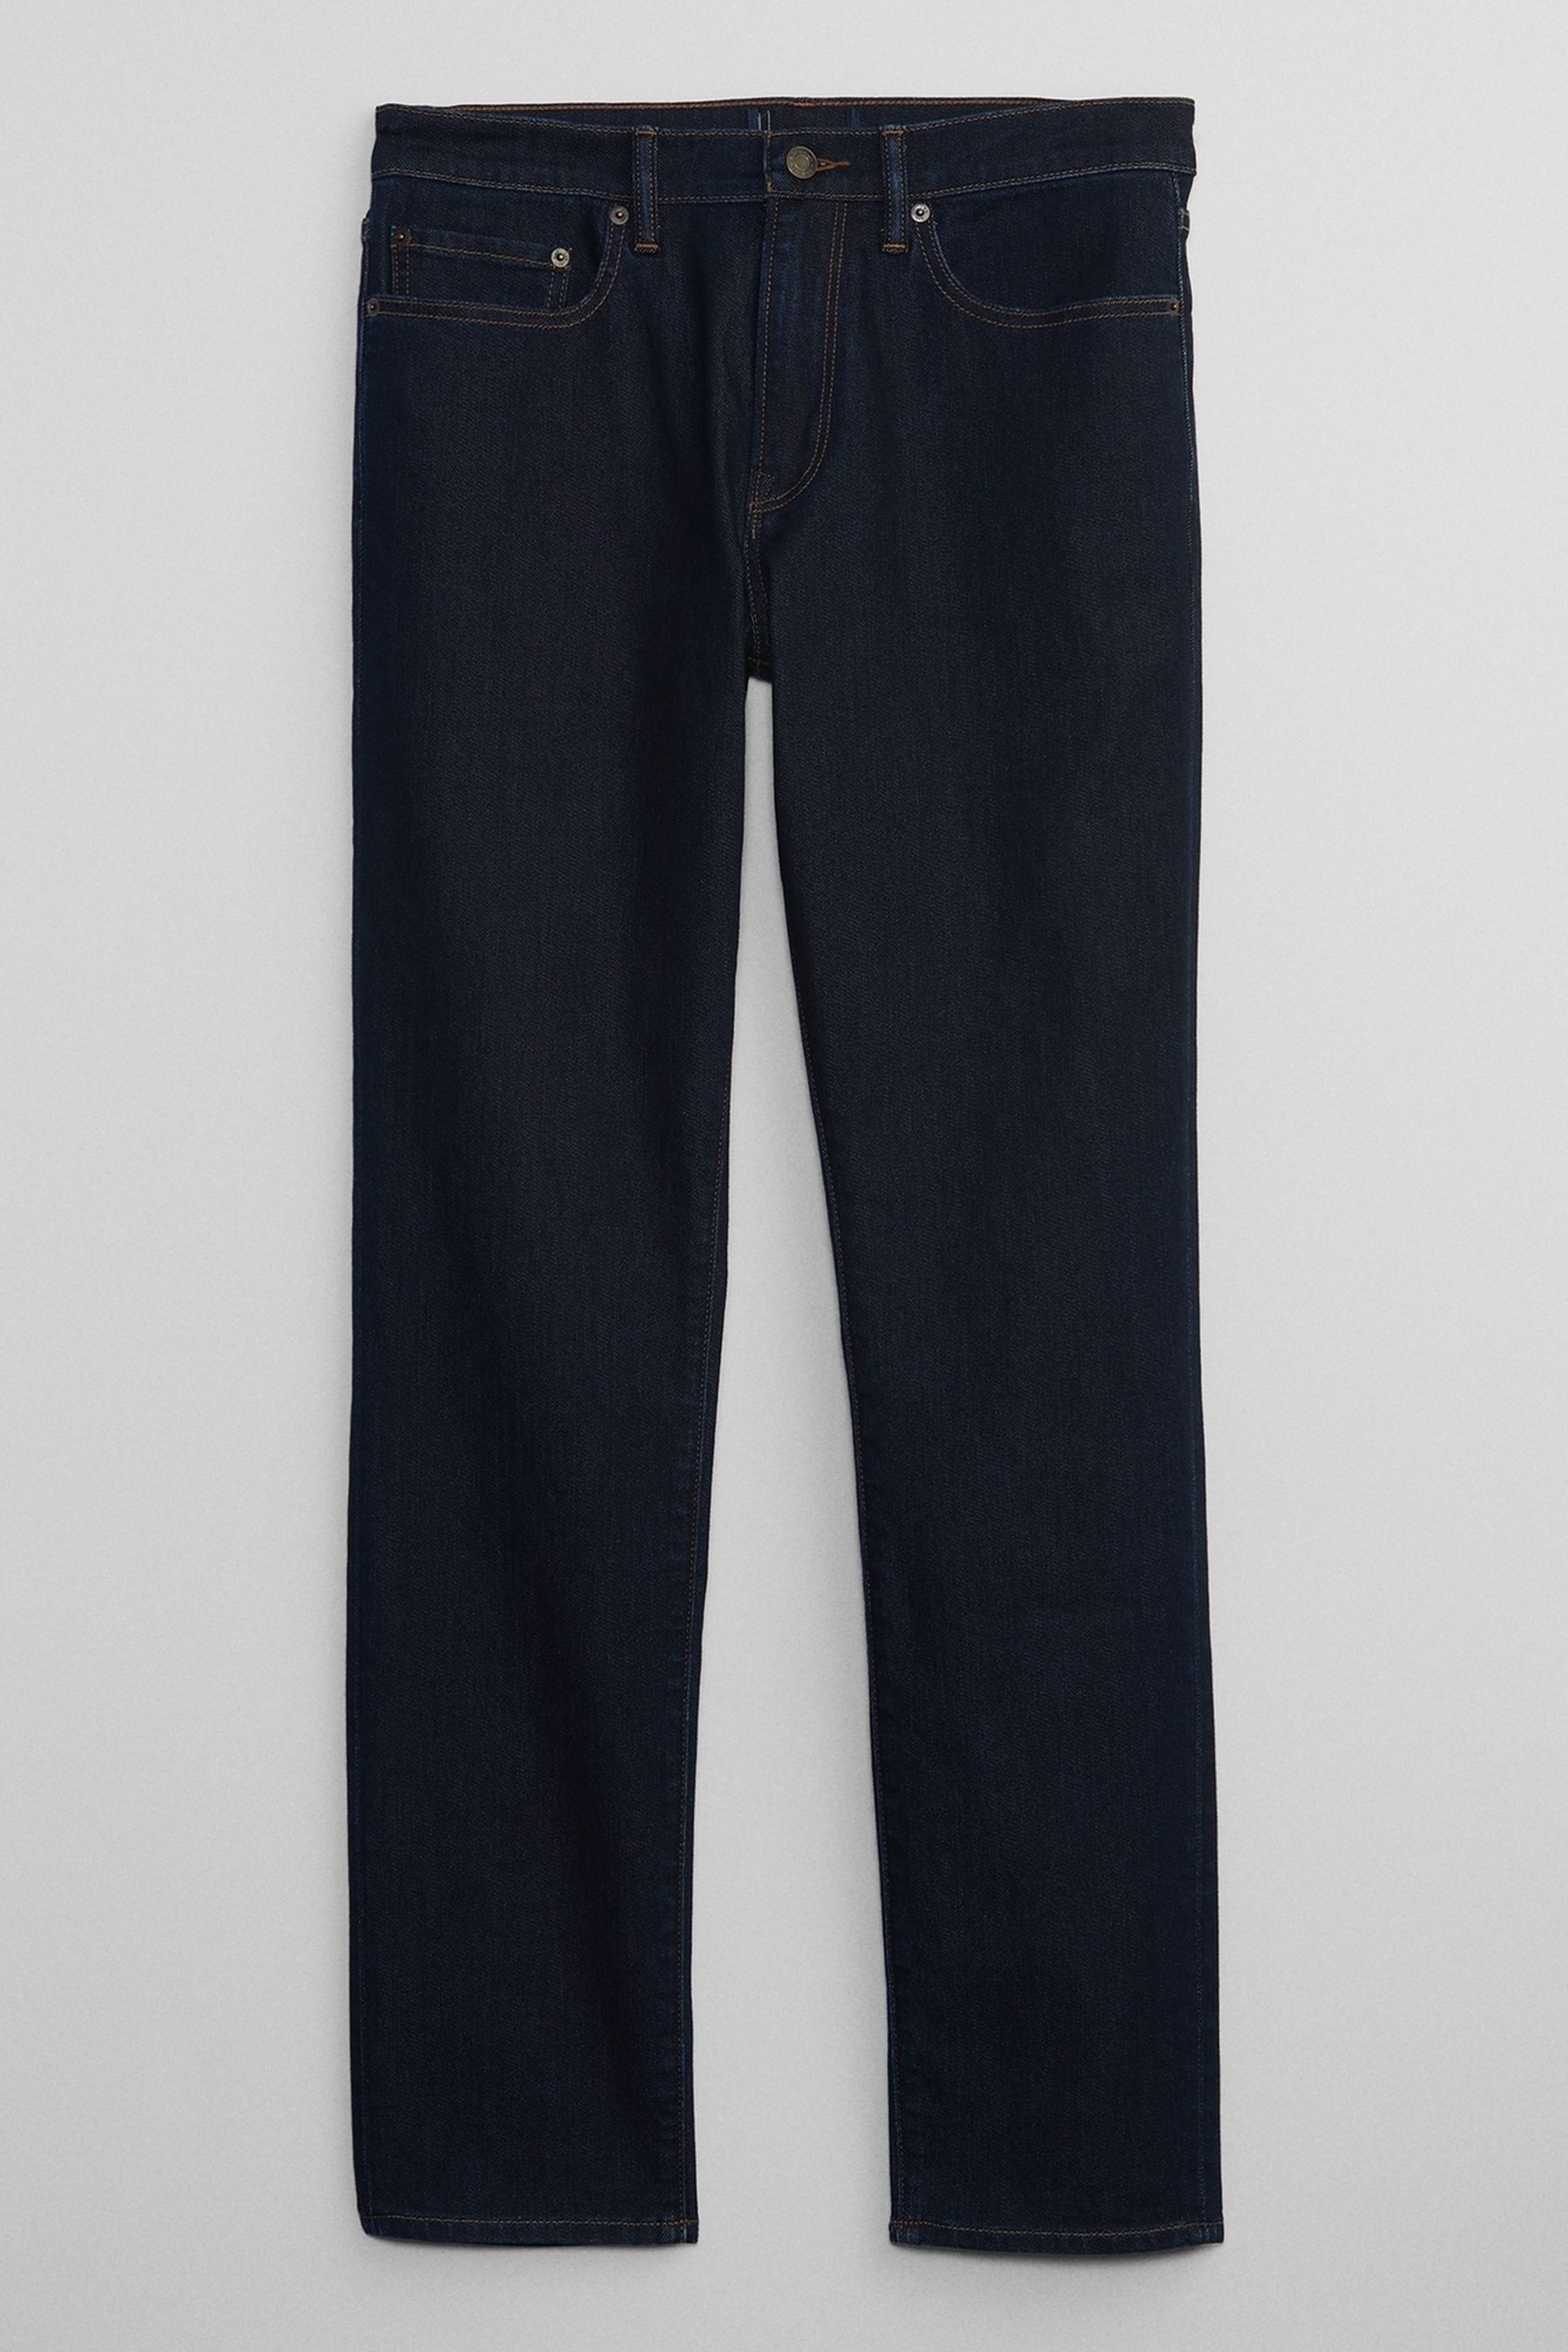 Buy Gap Slim Fit Jeans with Washwell from the Gap online shop